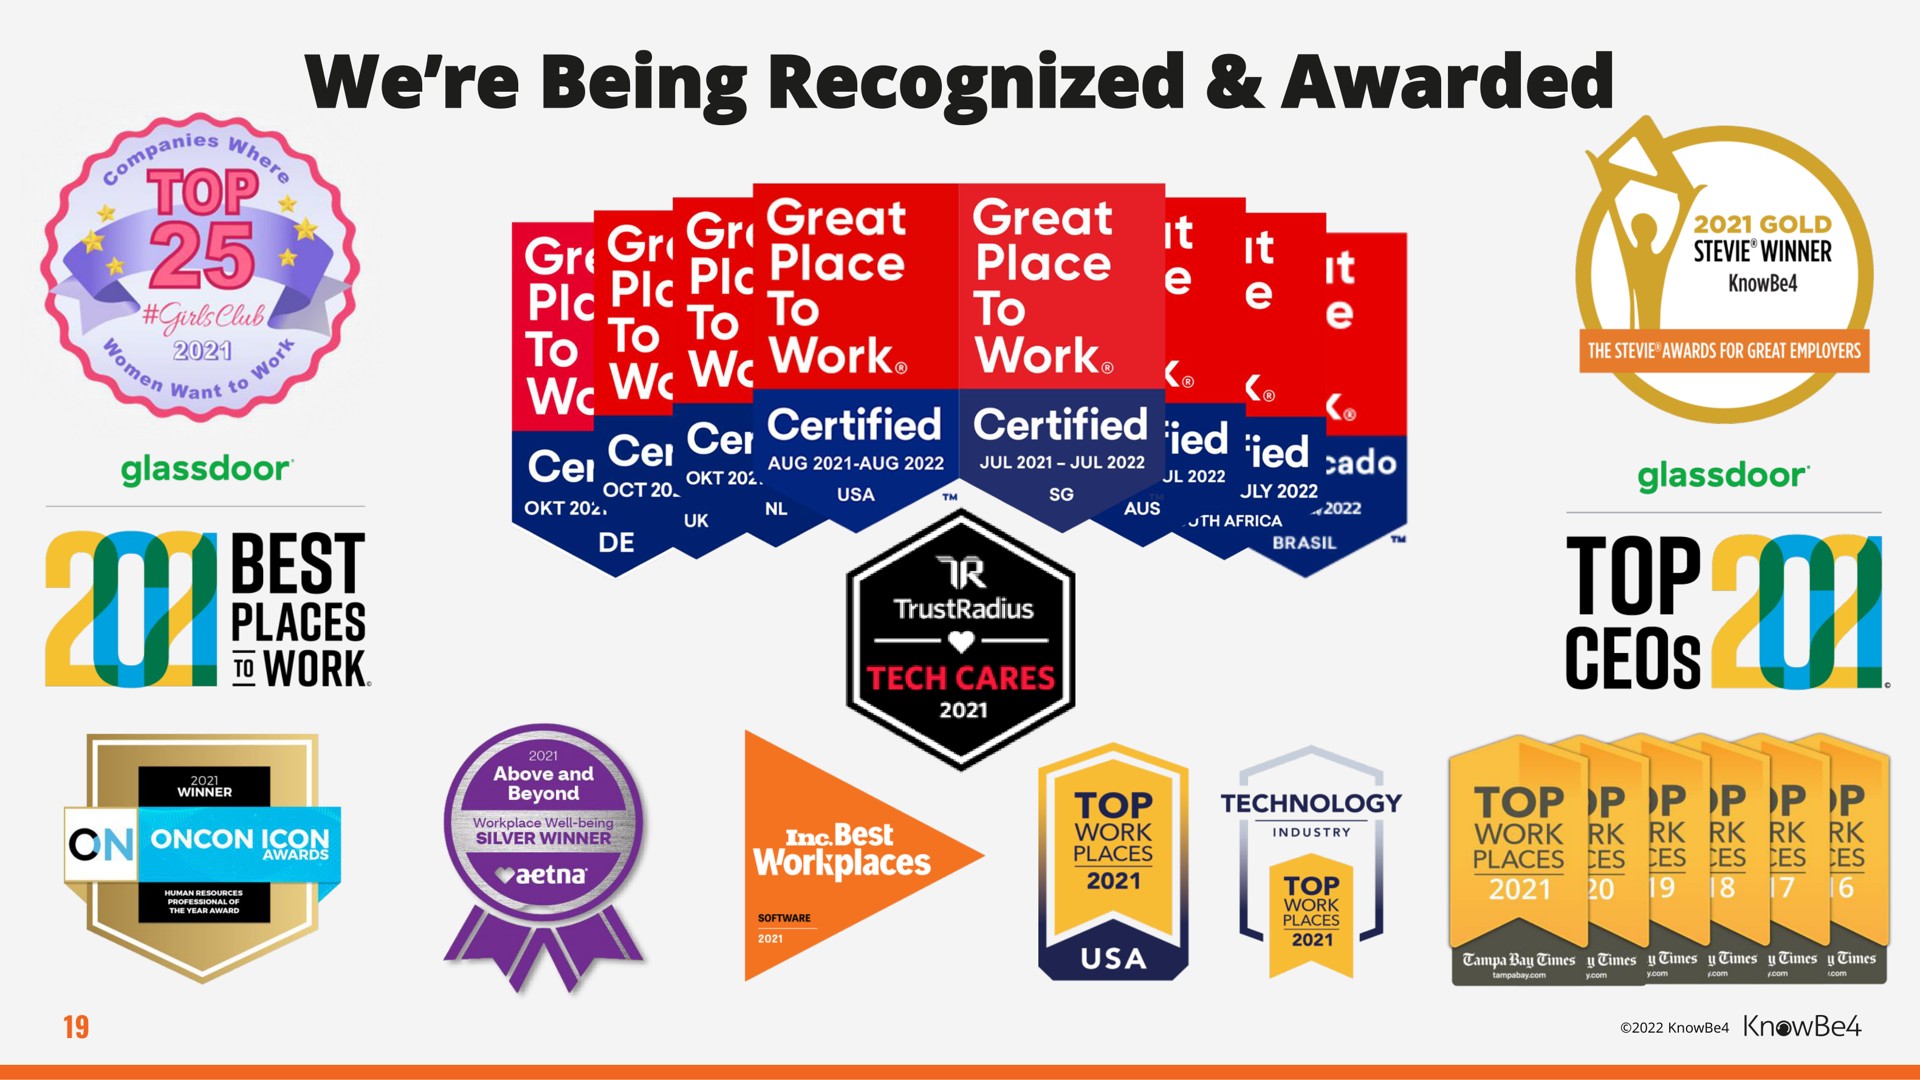 we being recognized awarded best places work great place a i great place to be | KnowBe4